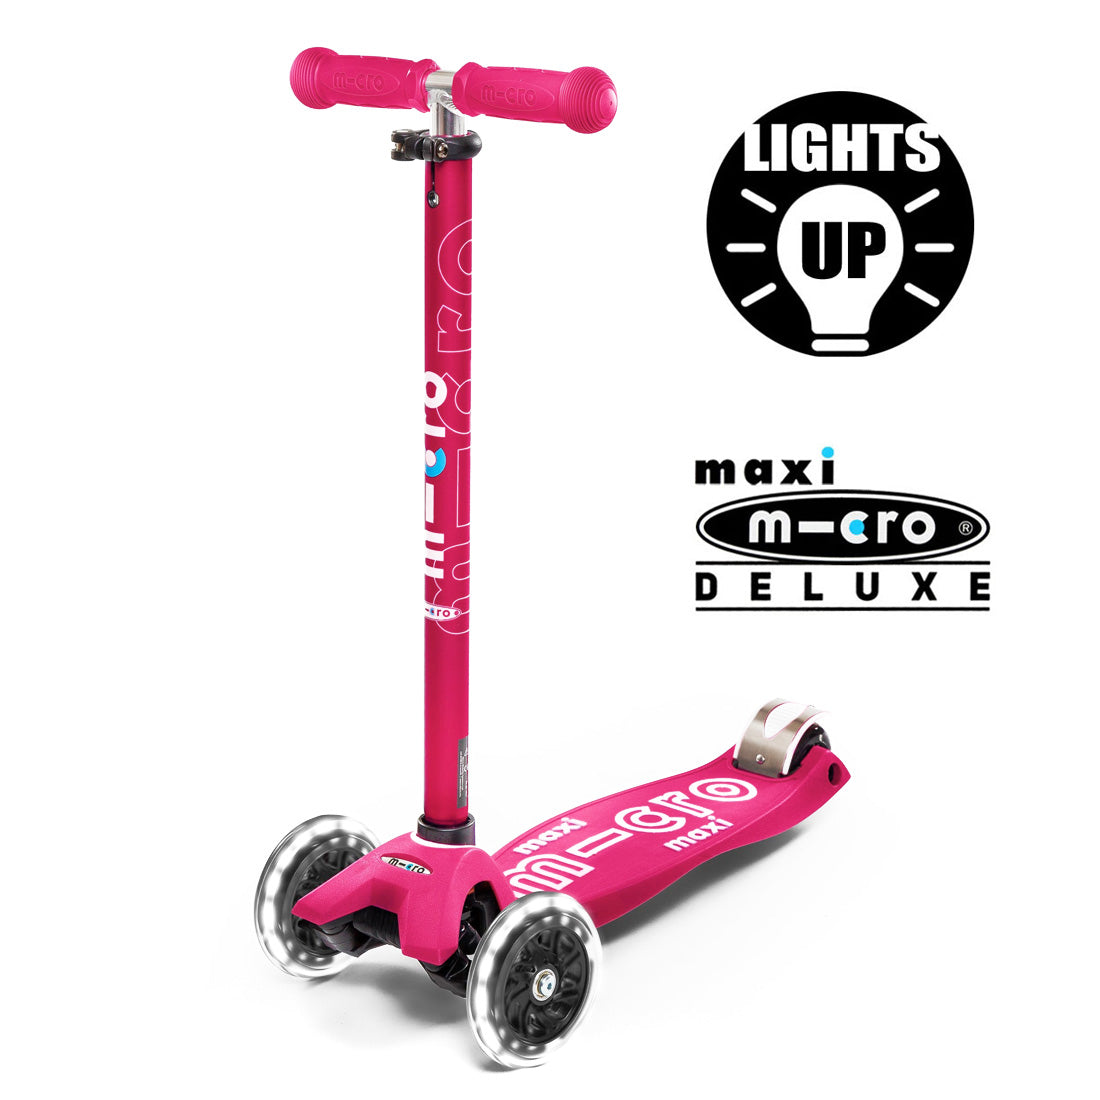 Micro Maxi Deluxe LED Scooter - Pink Scooter Completes Rec